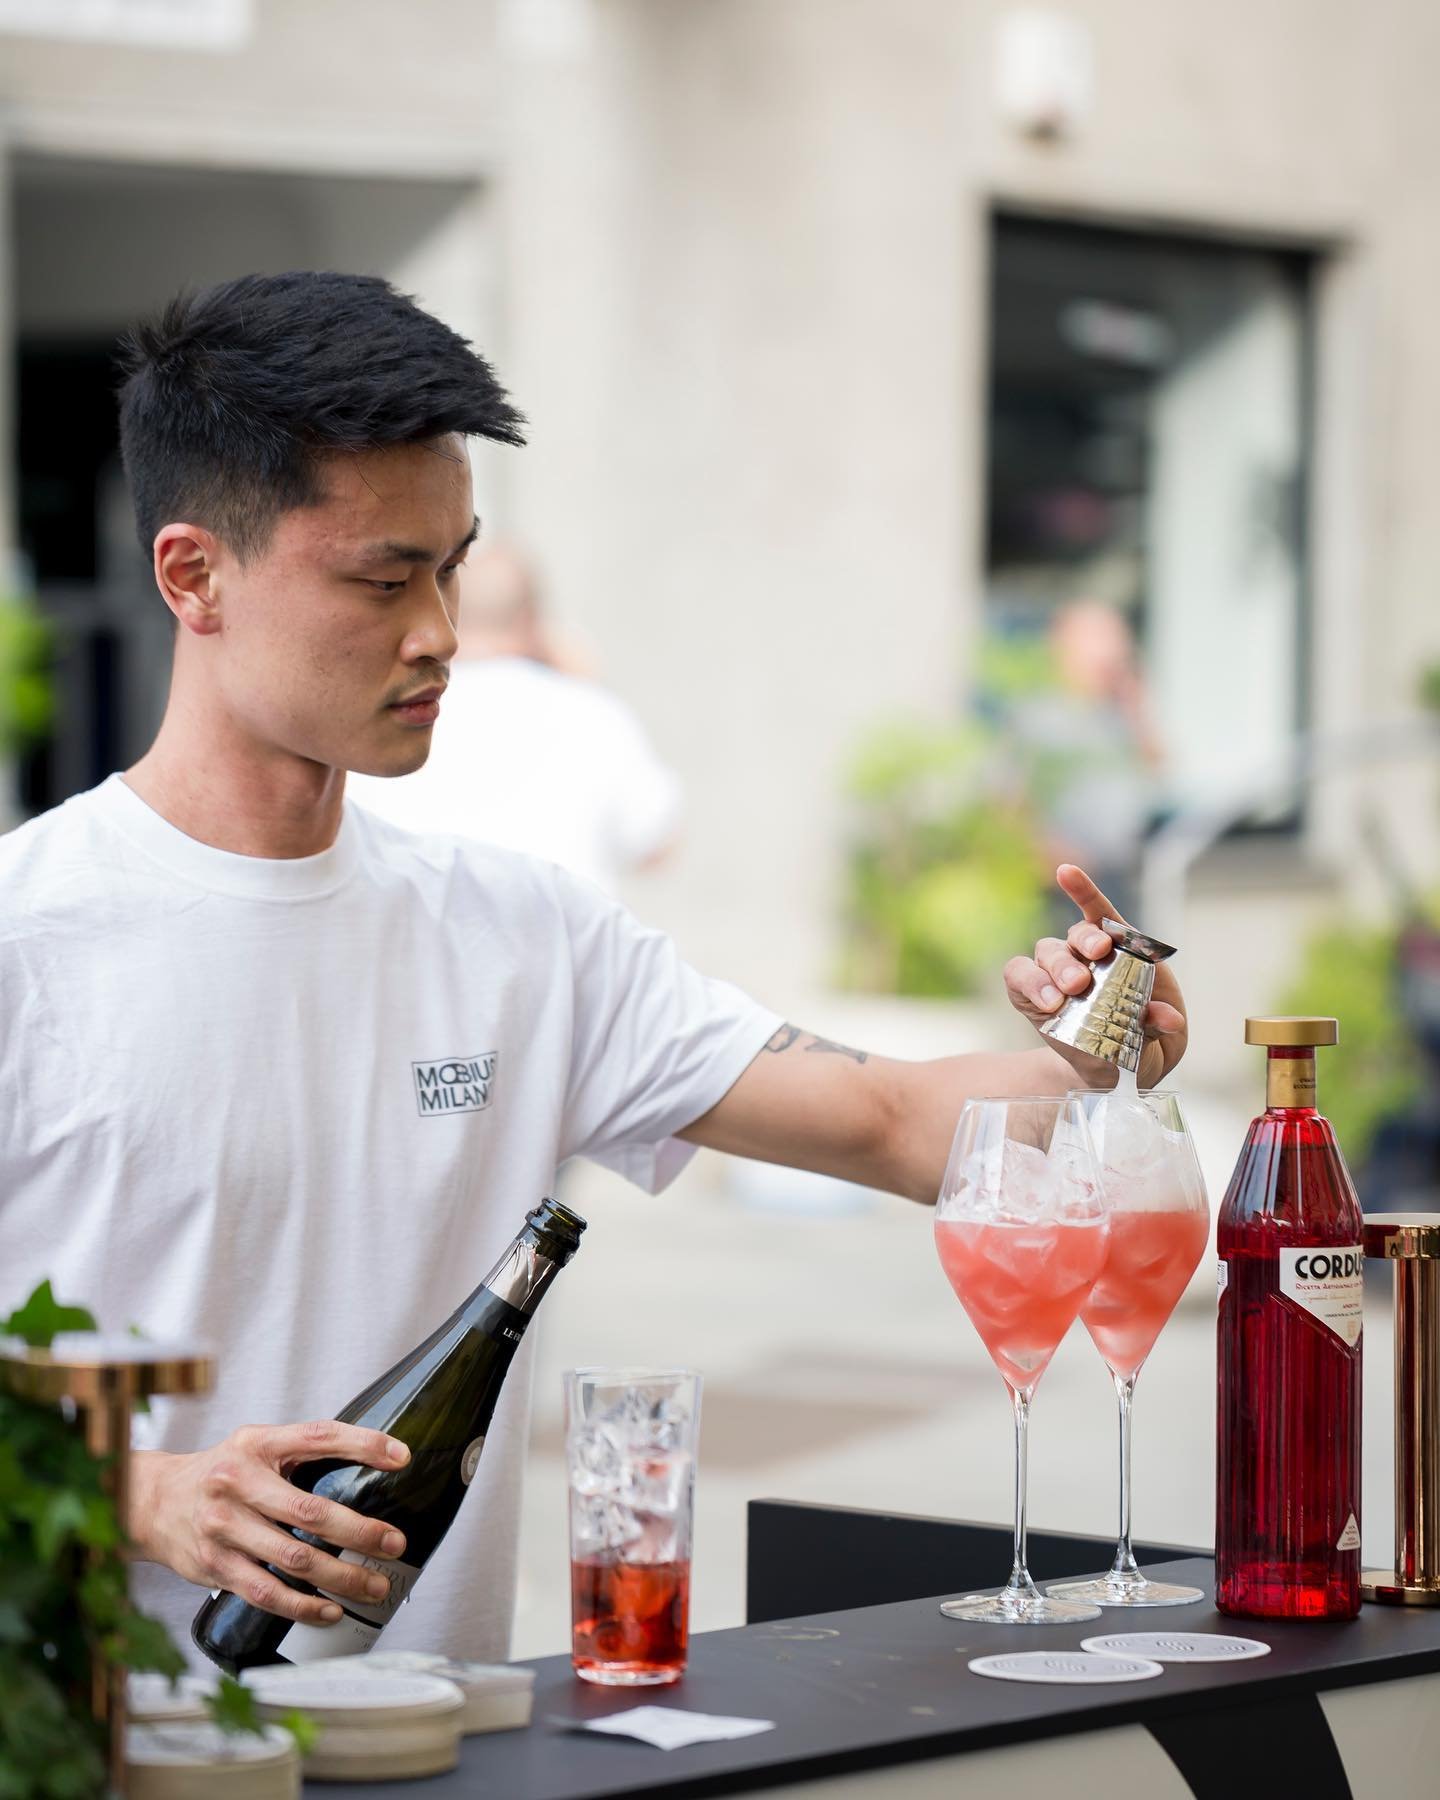 As every year, we love to bring together great professionals of our field, bartenders from the lake and not only! Many were the guests who followed us along the journey of the most exciting week of this summer!

#CLCW #CLCW23 #ComoLakeCocktailWeek #a